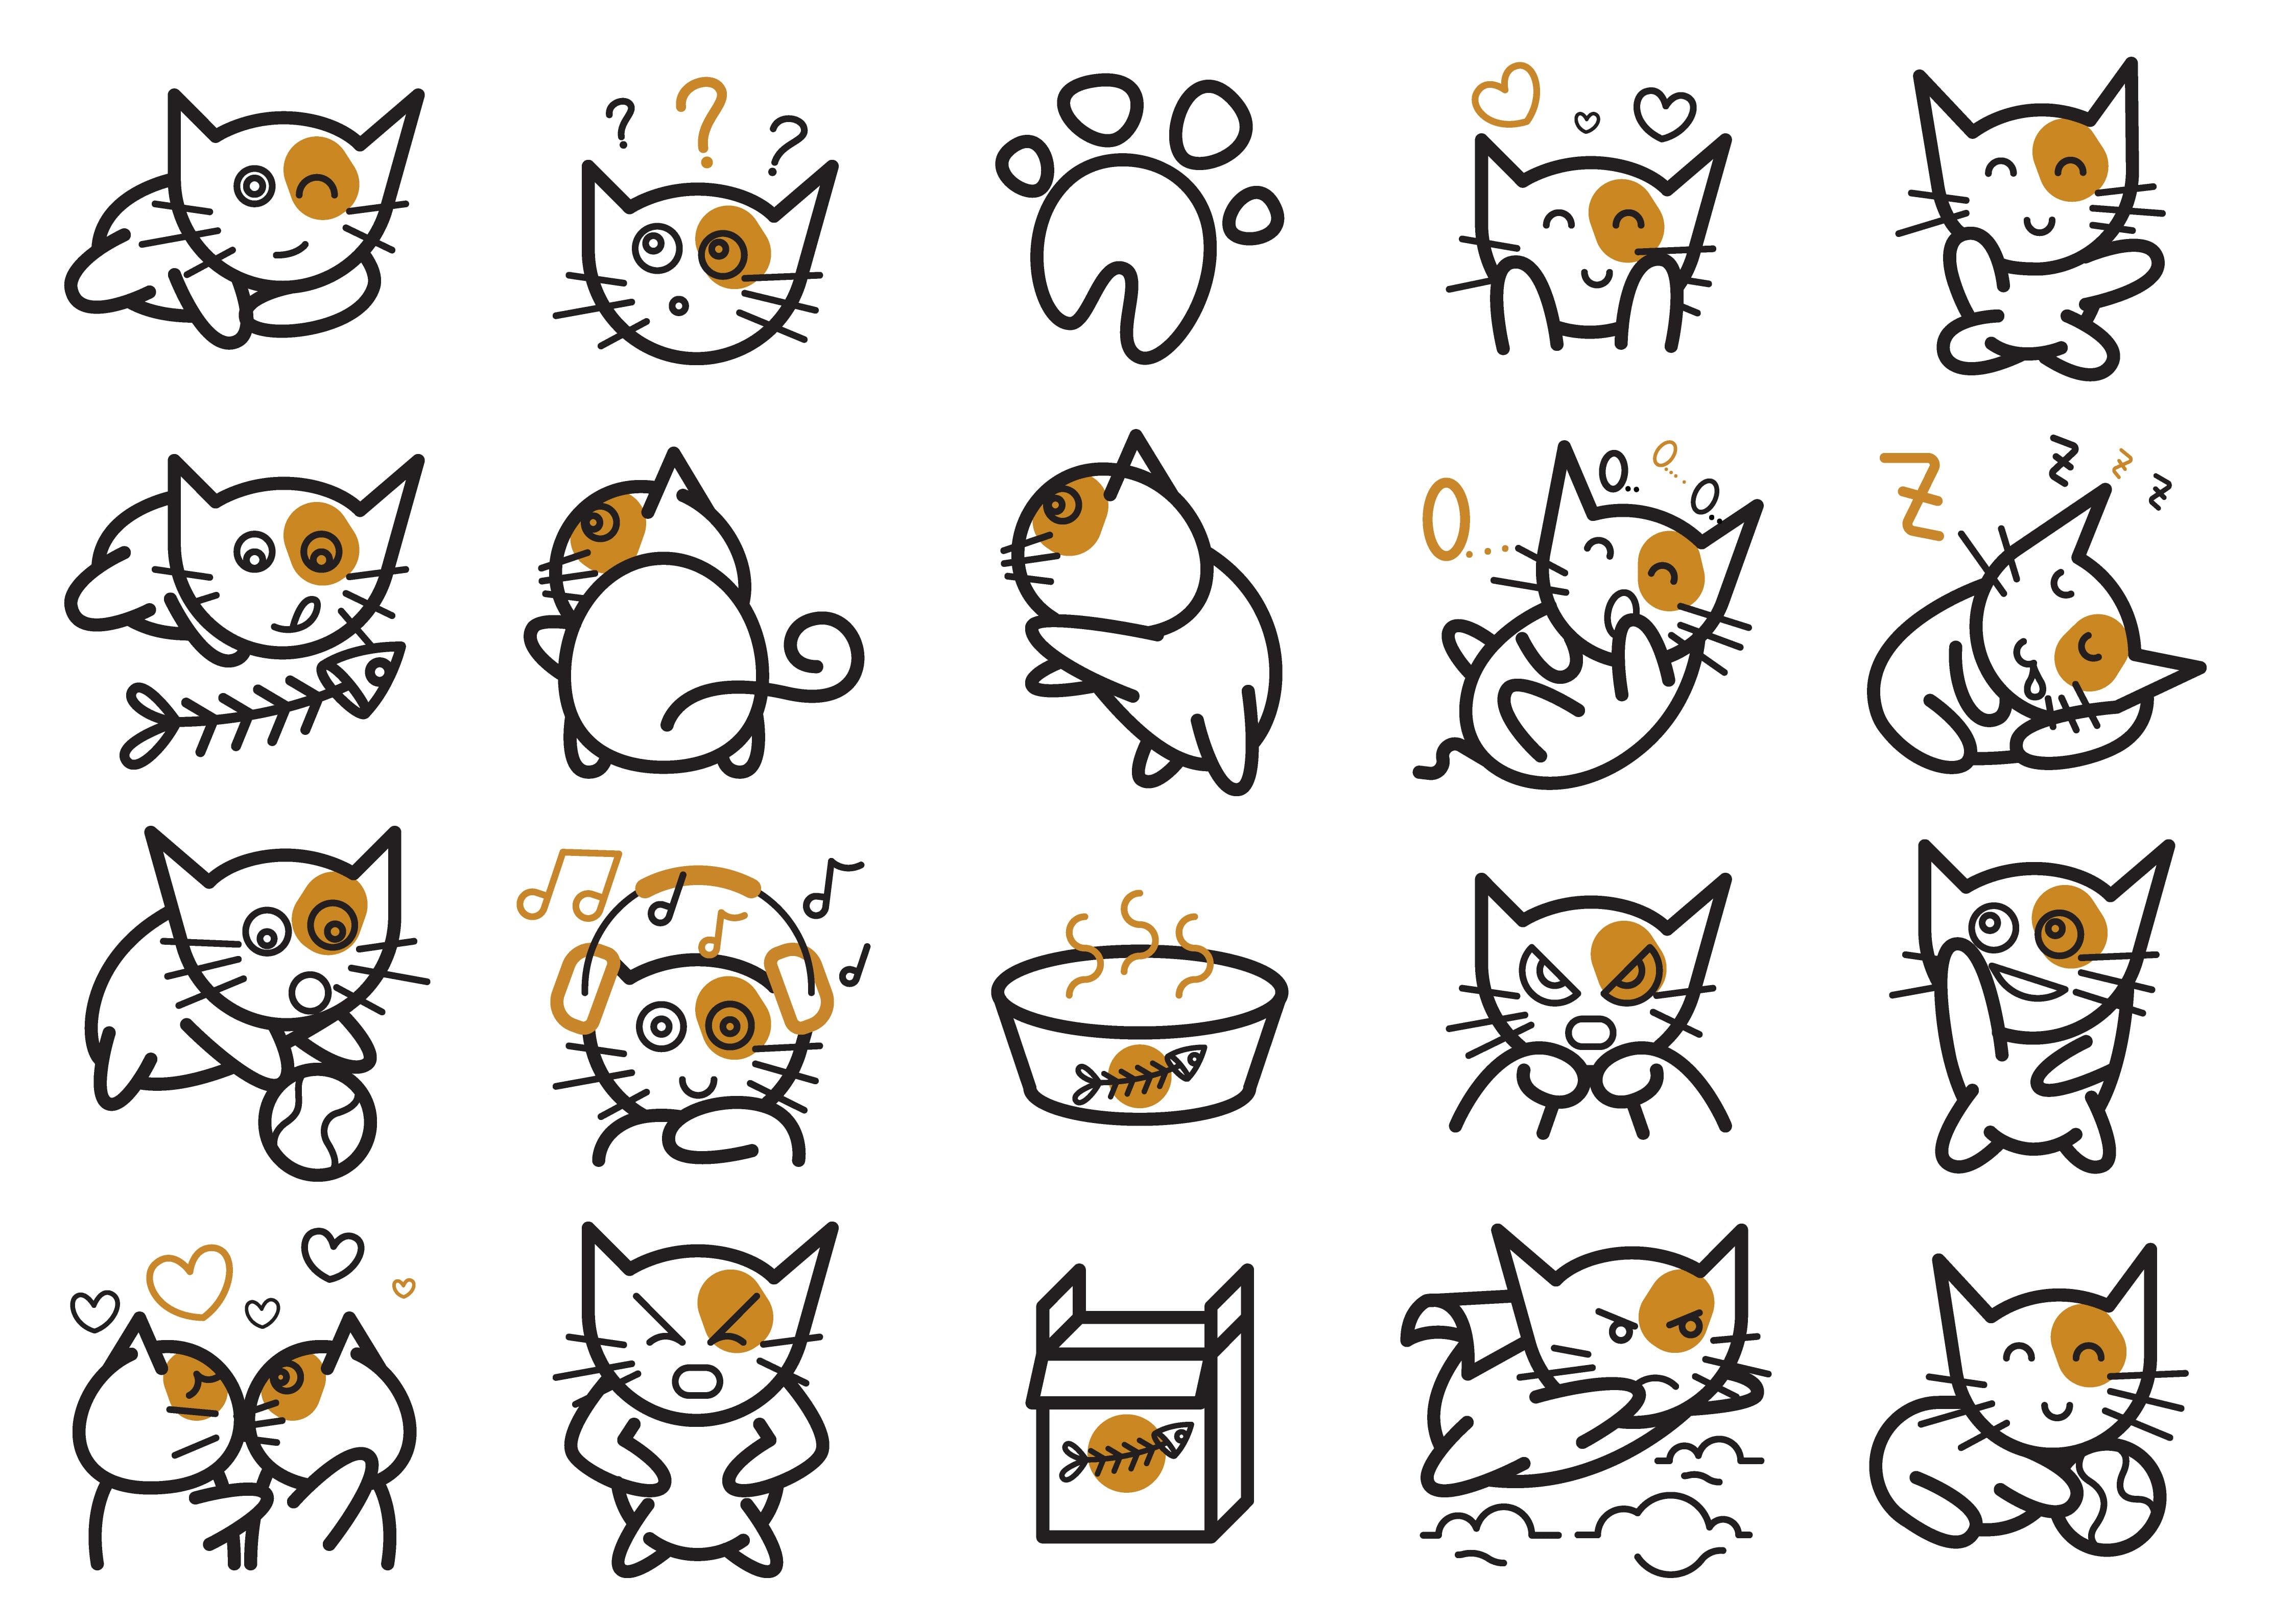 Cute and funny cats doodle vector set. Cartoon cat or kitten characters  design collection with flat colors in different poses. Set of purebred pet  animals isolated on white background. - So Fontsy